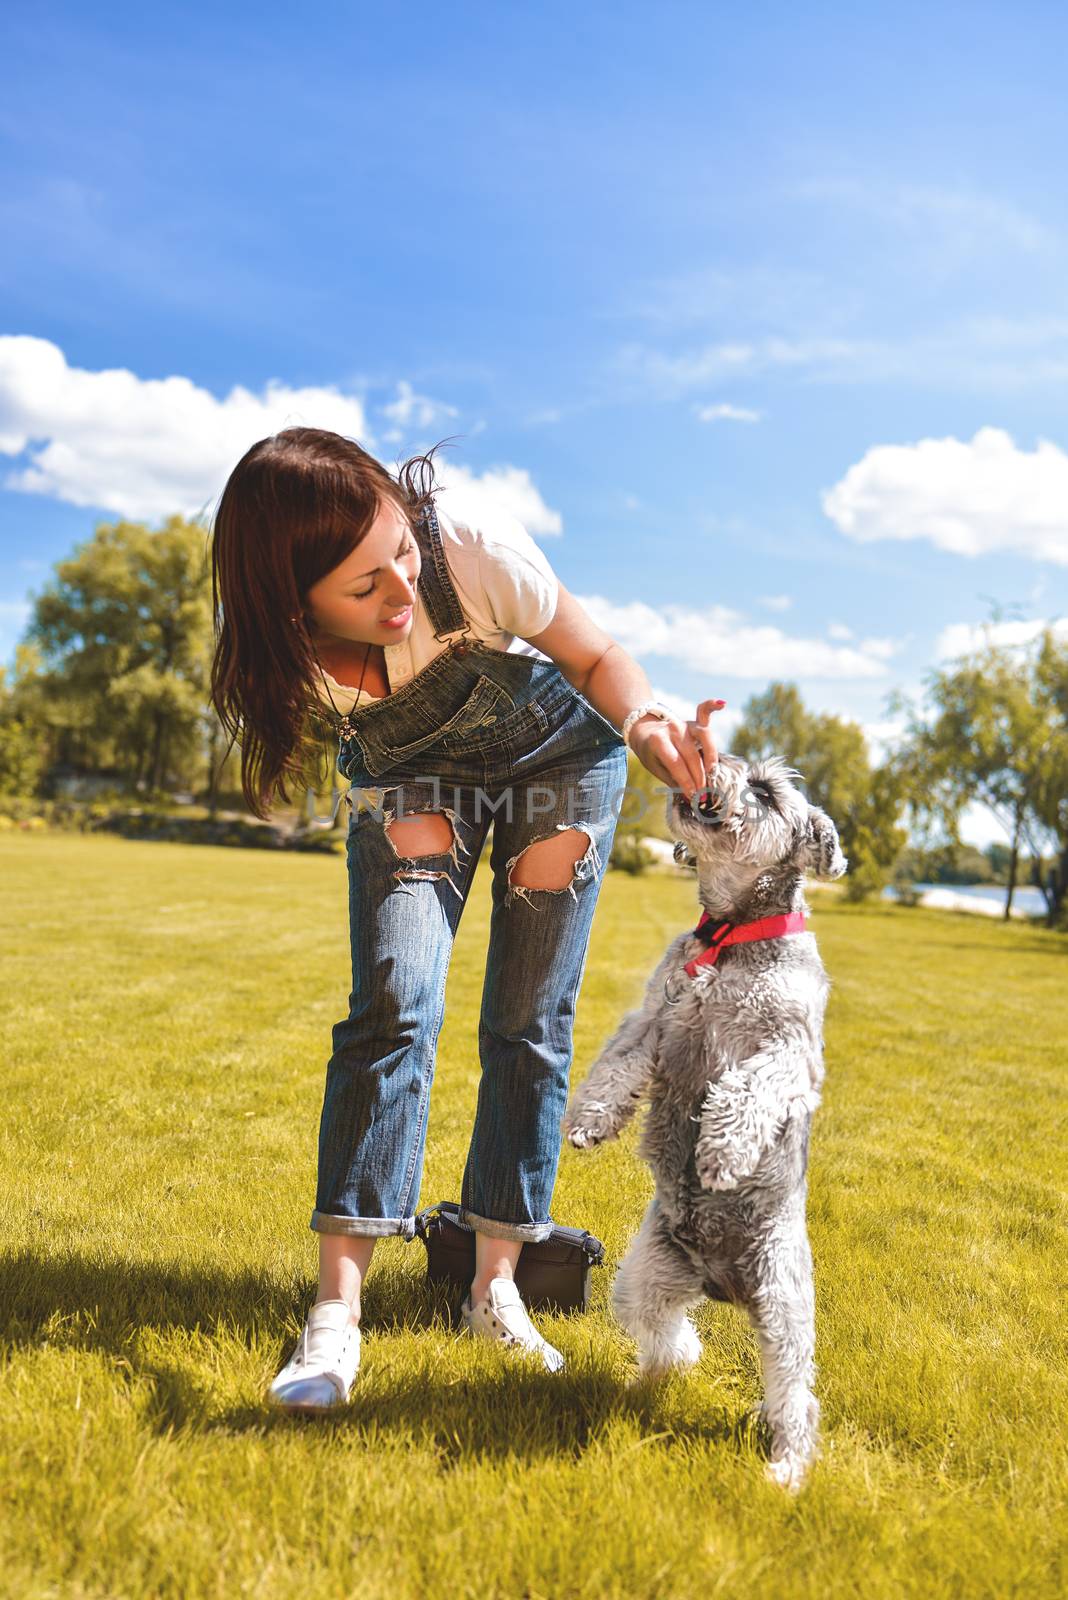 Caucasian woman trains and feeds her beloved dog in the park.